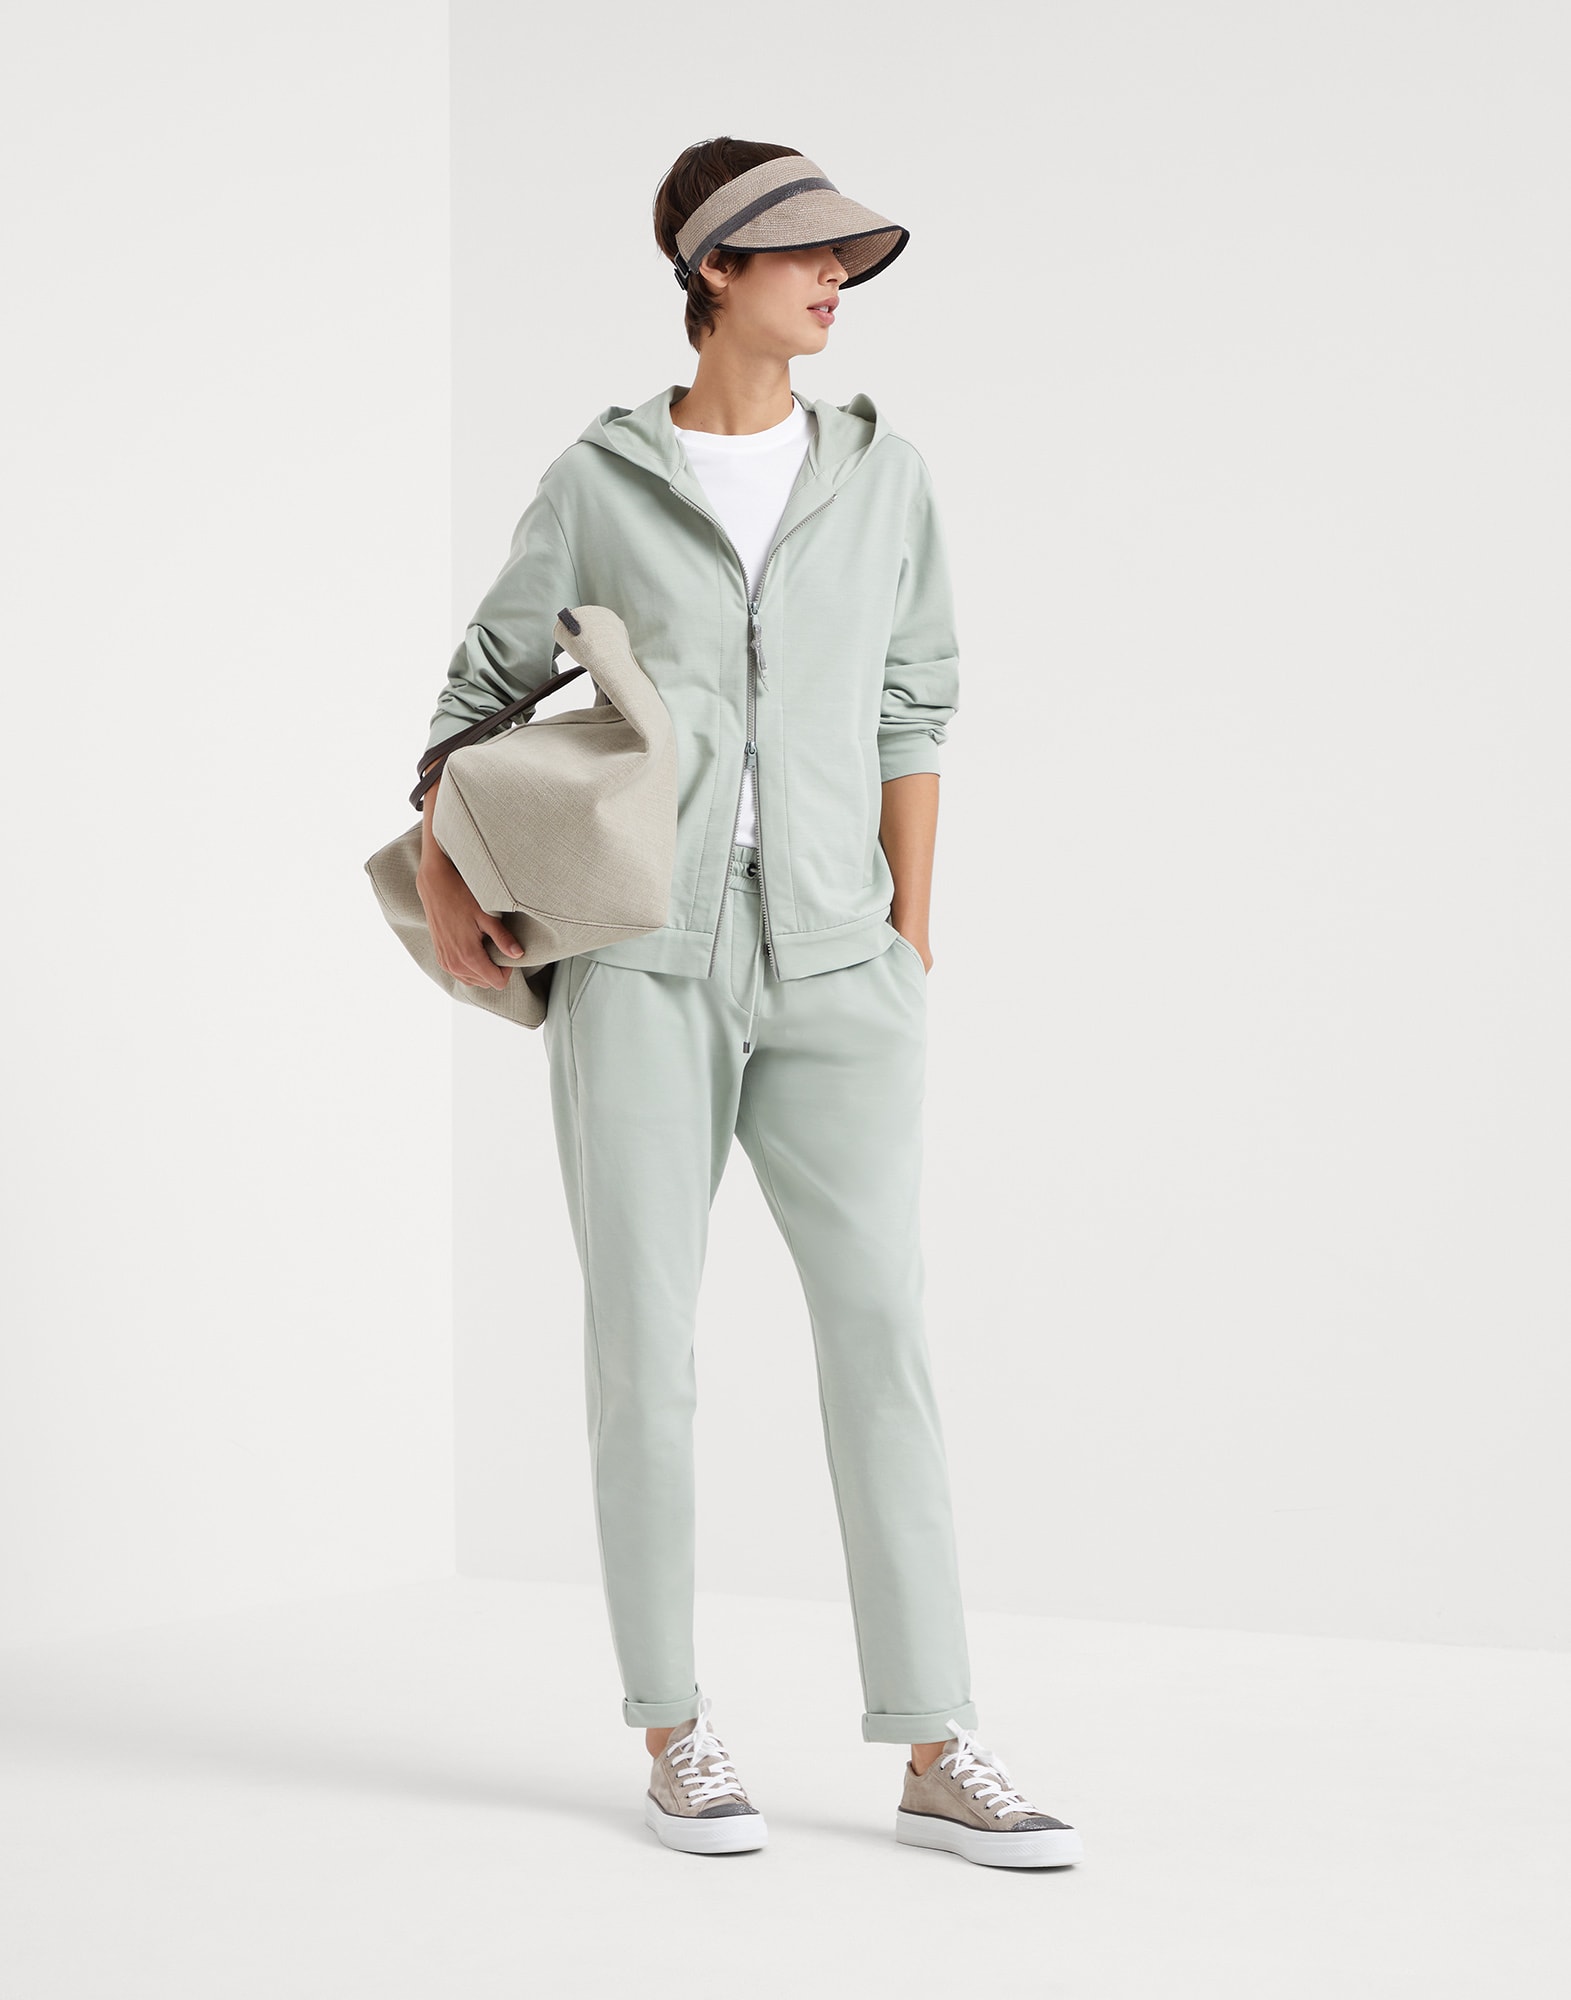 Discover Look 241WOUTFITTRAVEL4 - Brunello Cucinelli